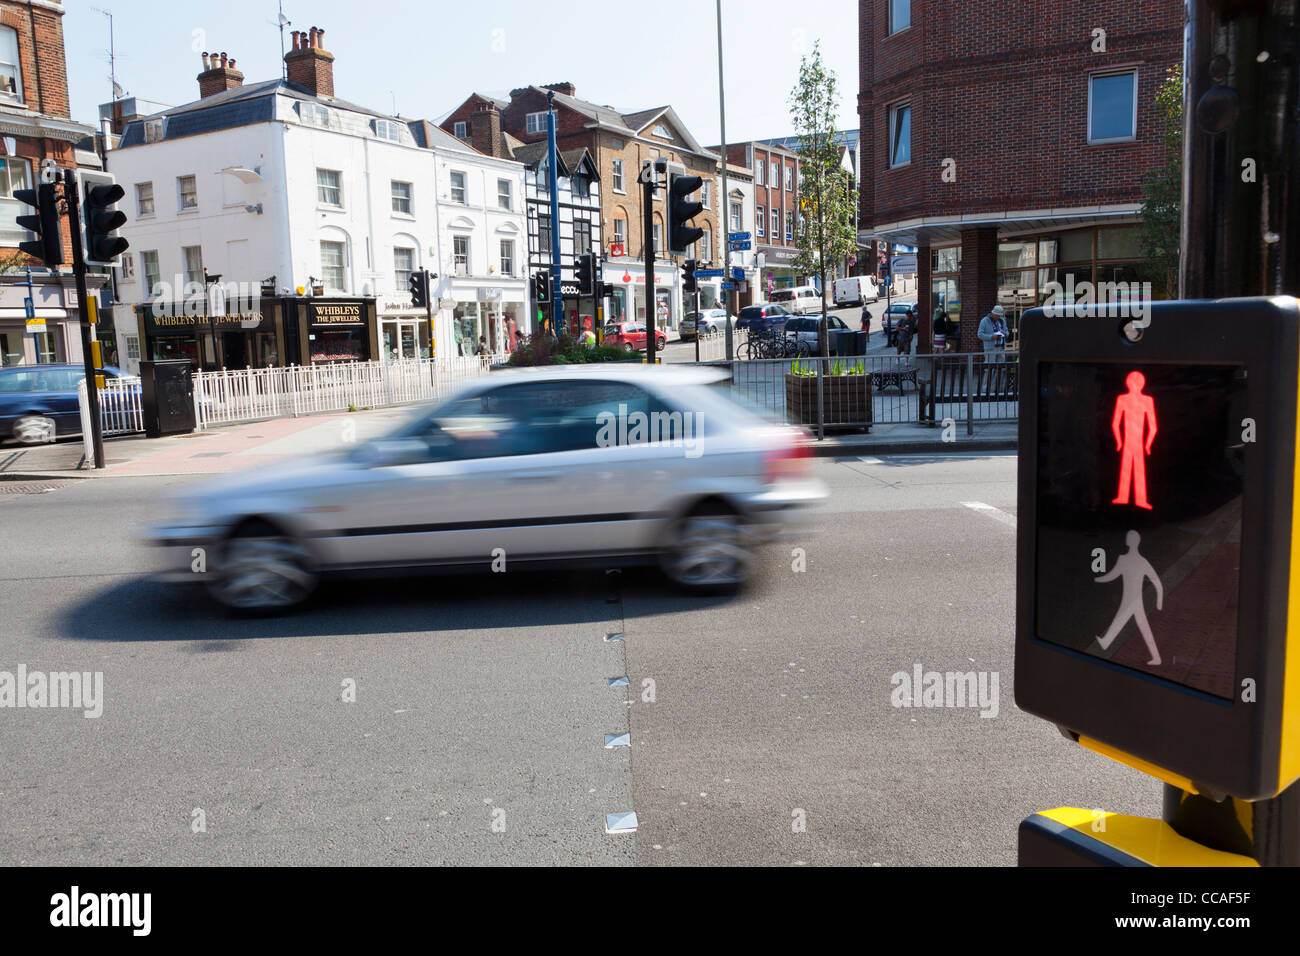 Pedestrian crossing set to red with blurred car in background. Stock Photo